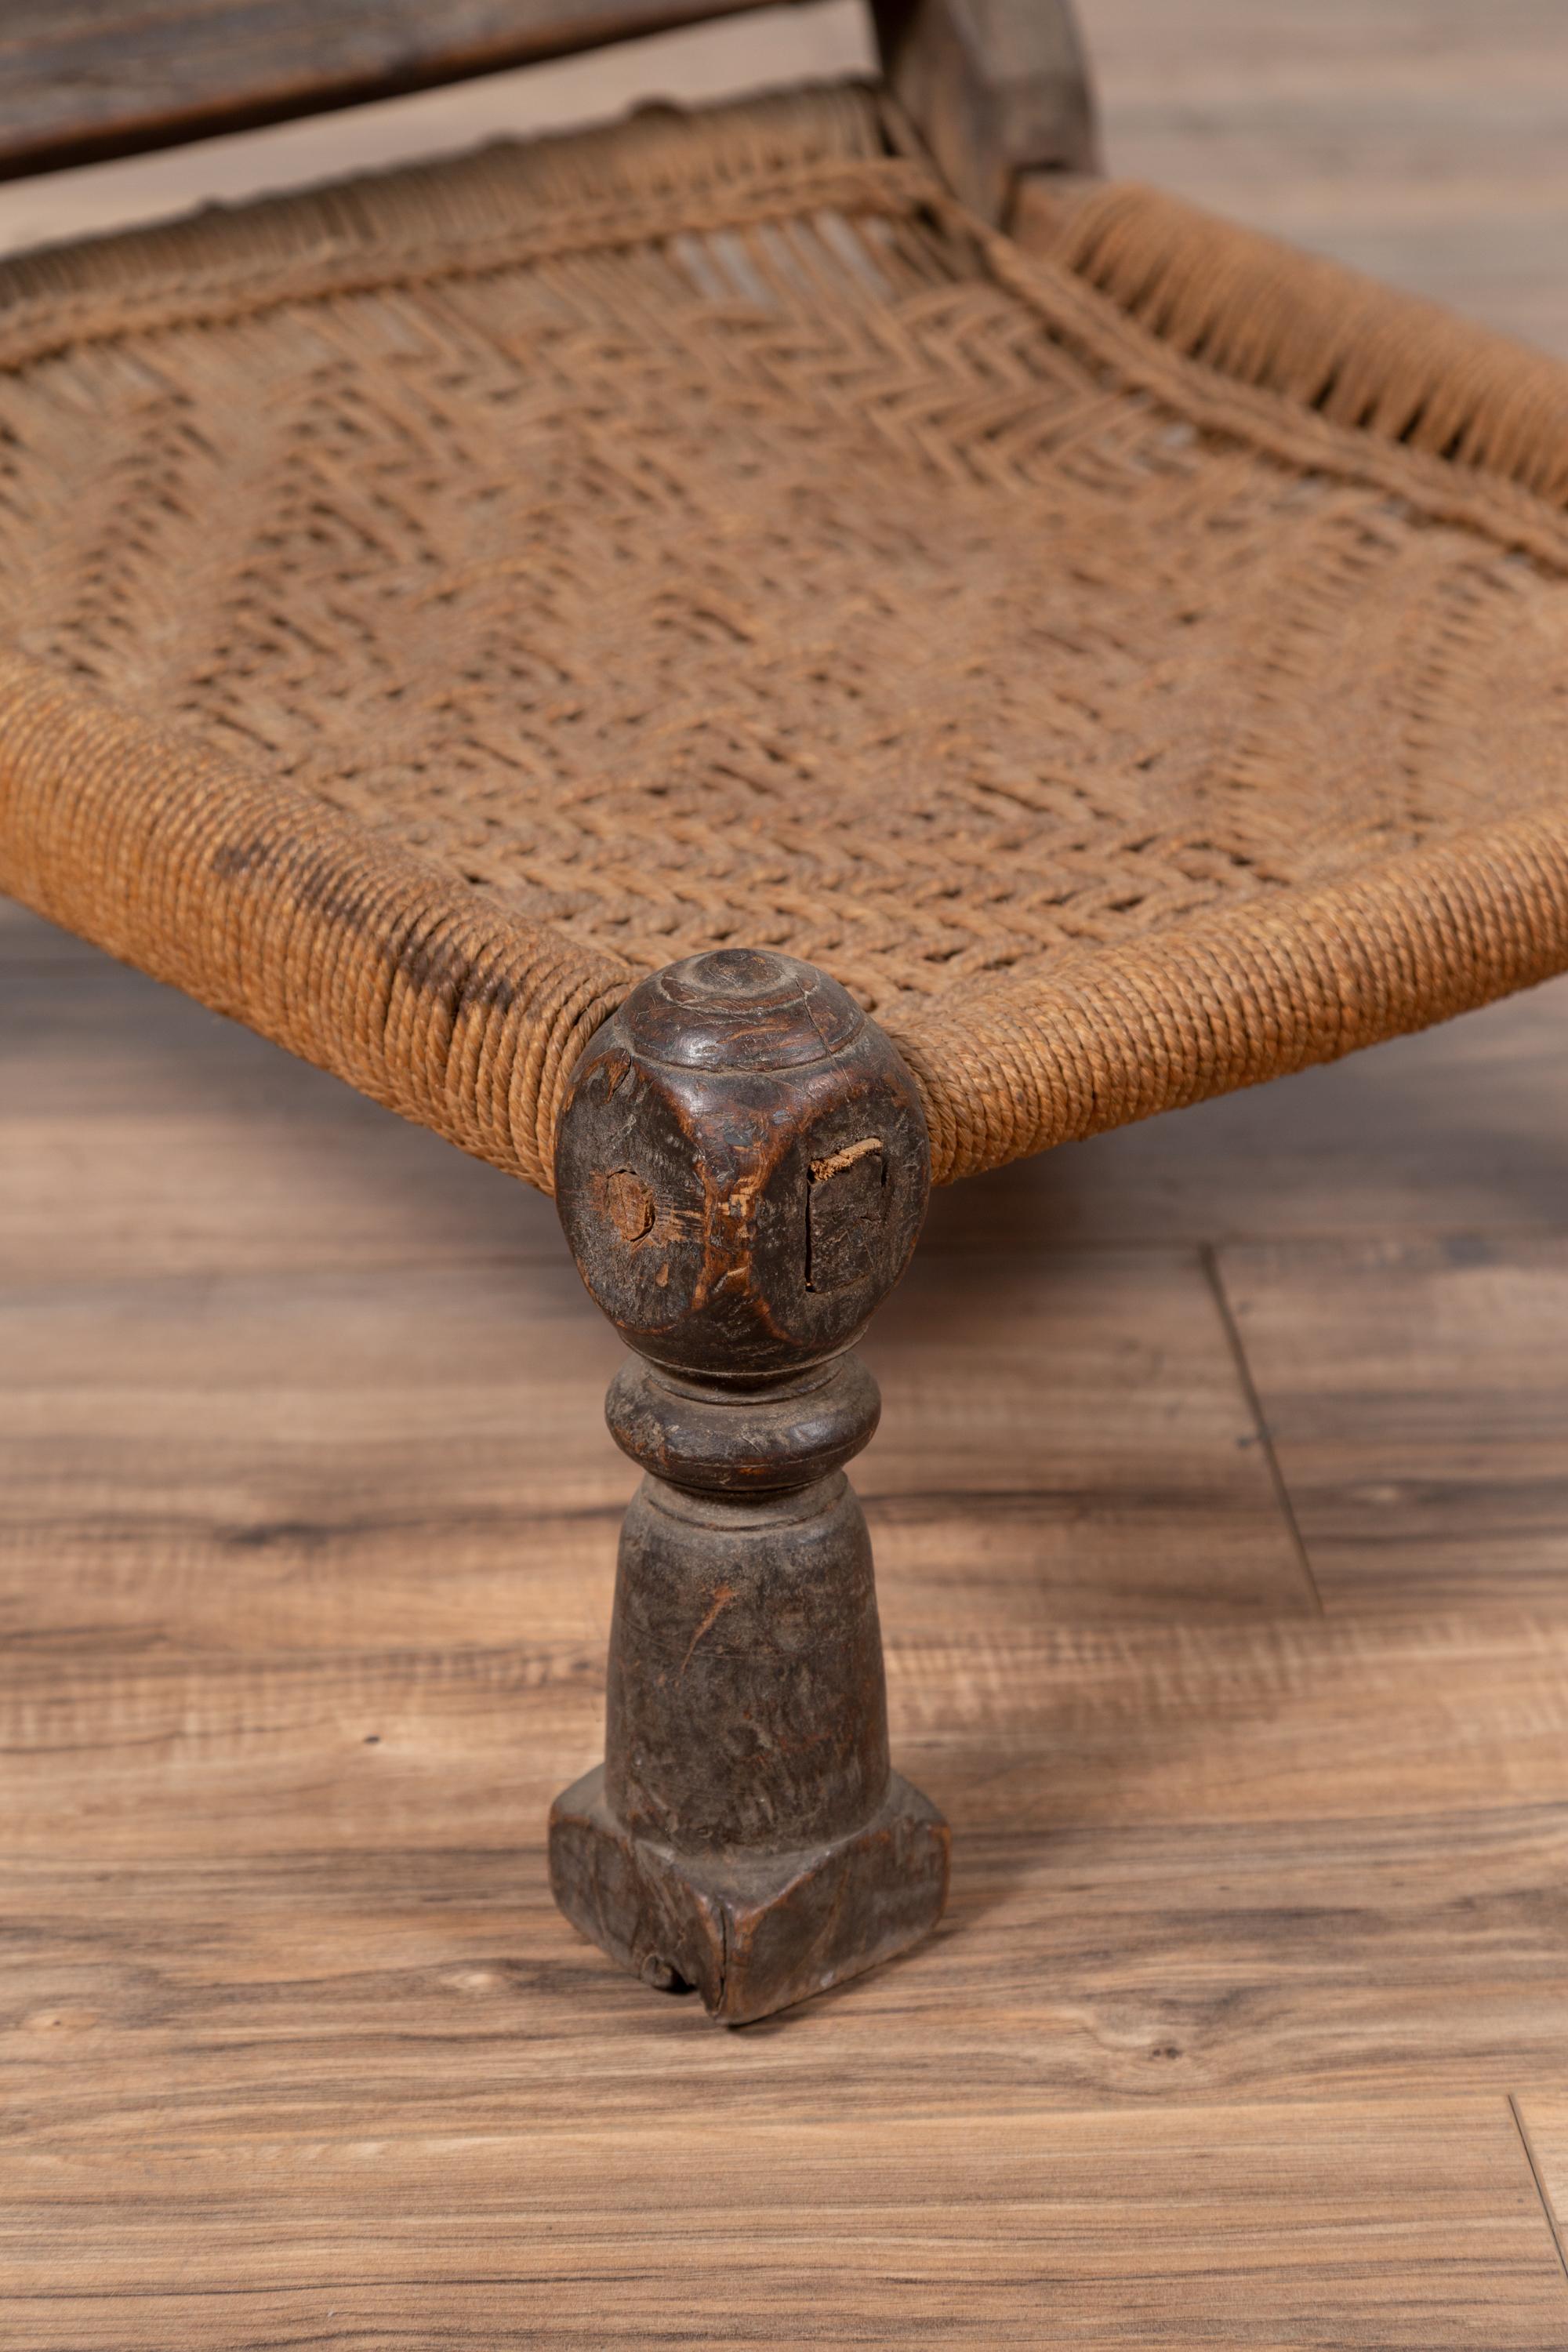 Indian Antique Rustic Low Seat Wooden Chair with Carved Rosettes and Rope Seat For Sale 2